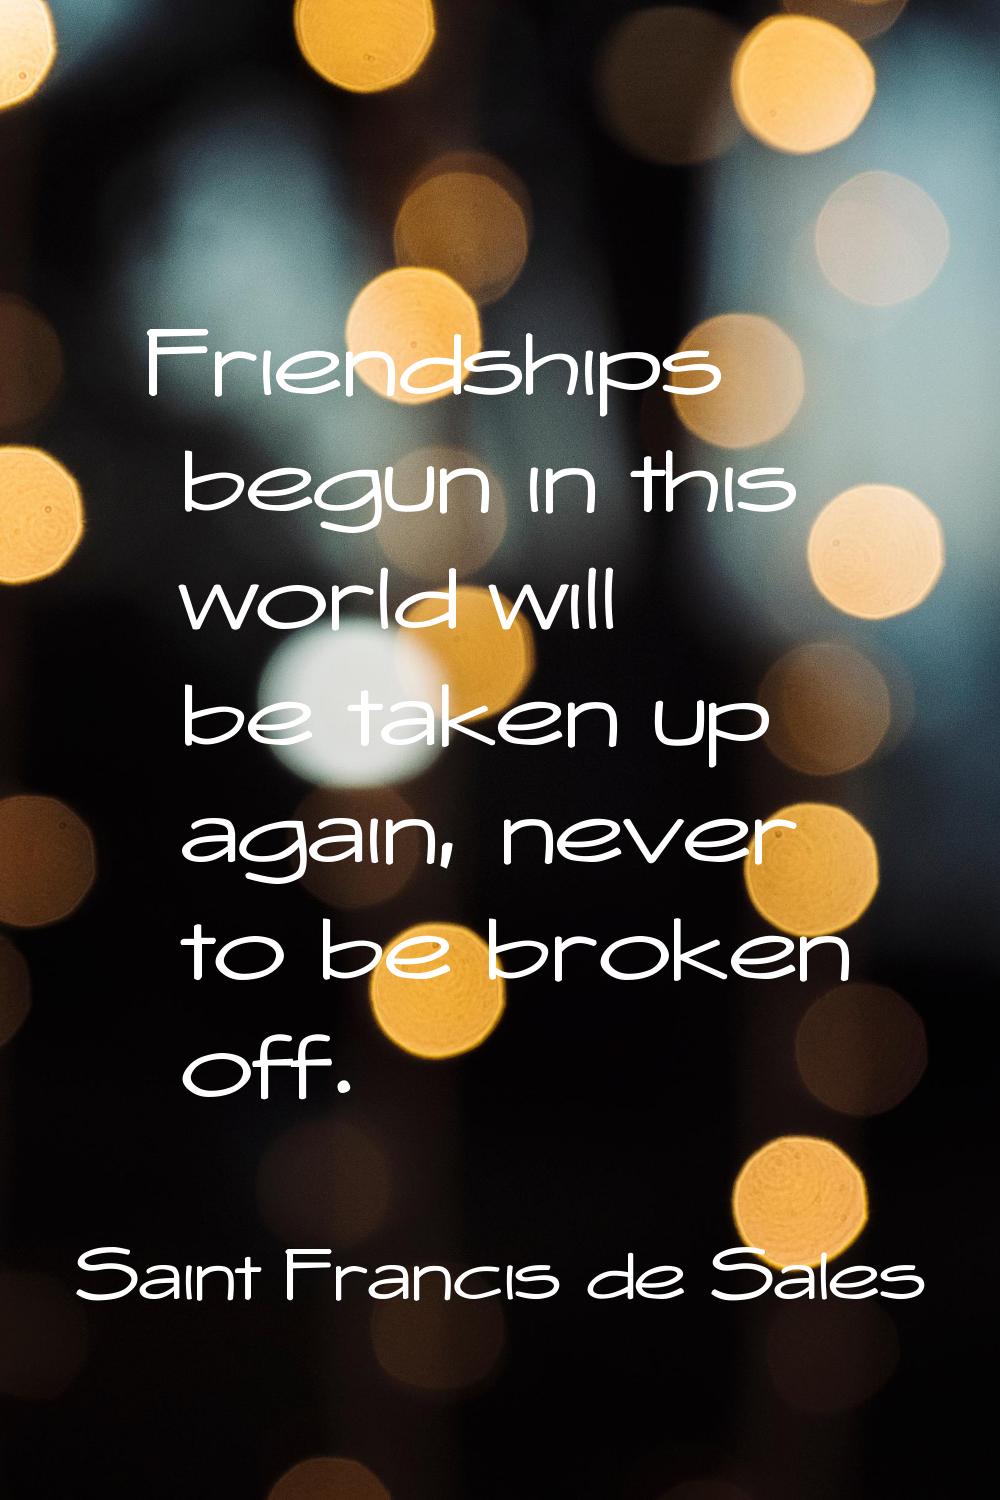 Friendships begun in this world will be taken up again, never to be broken off.